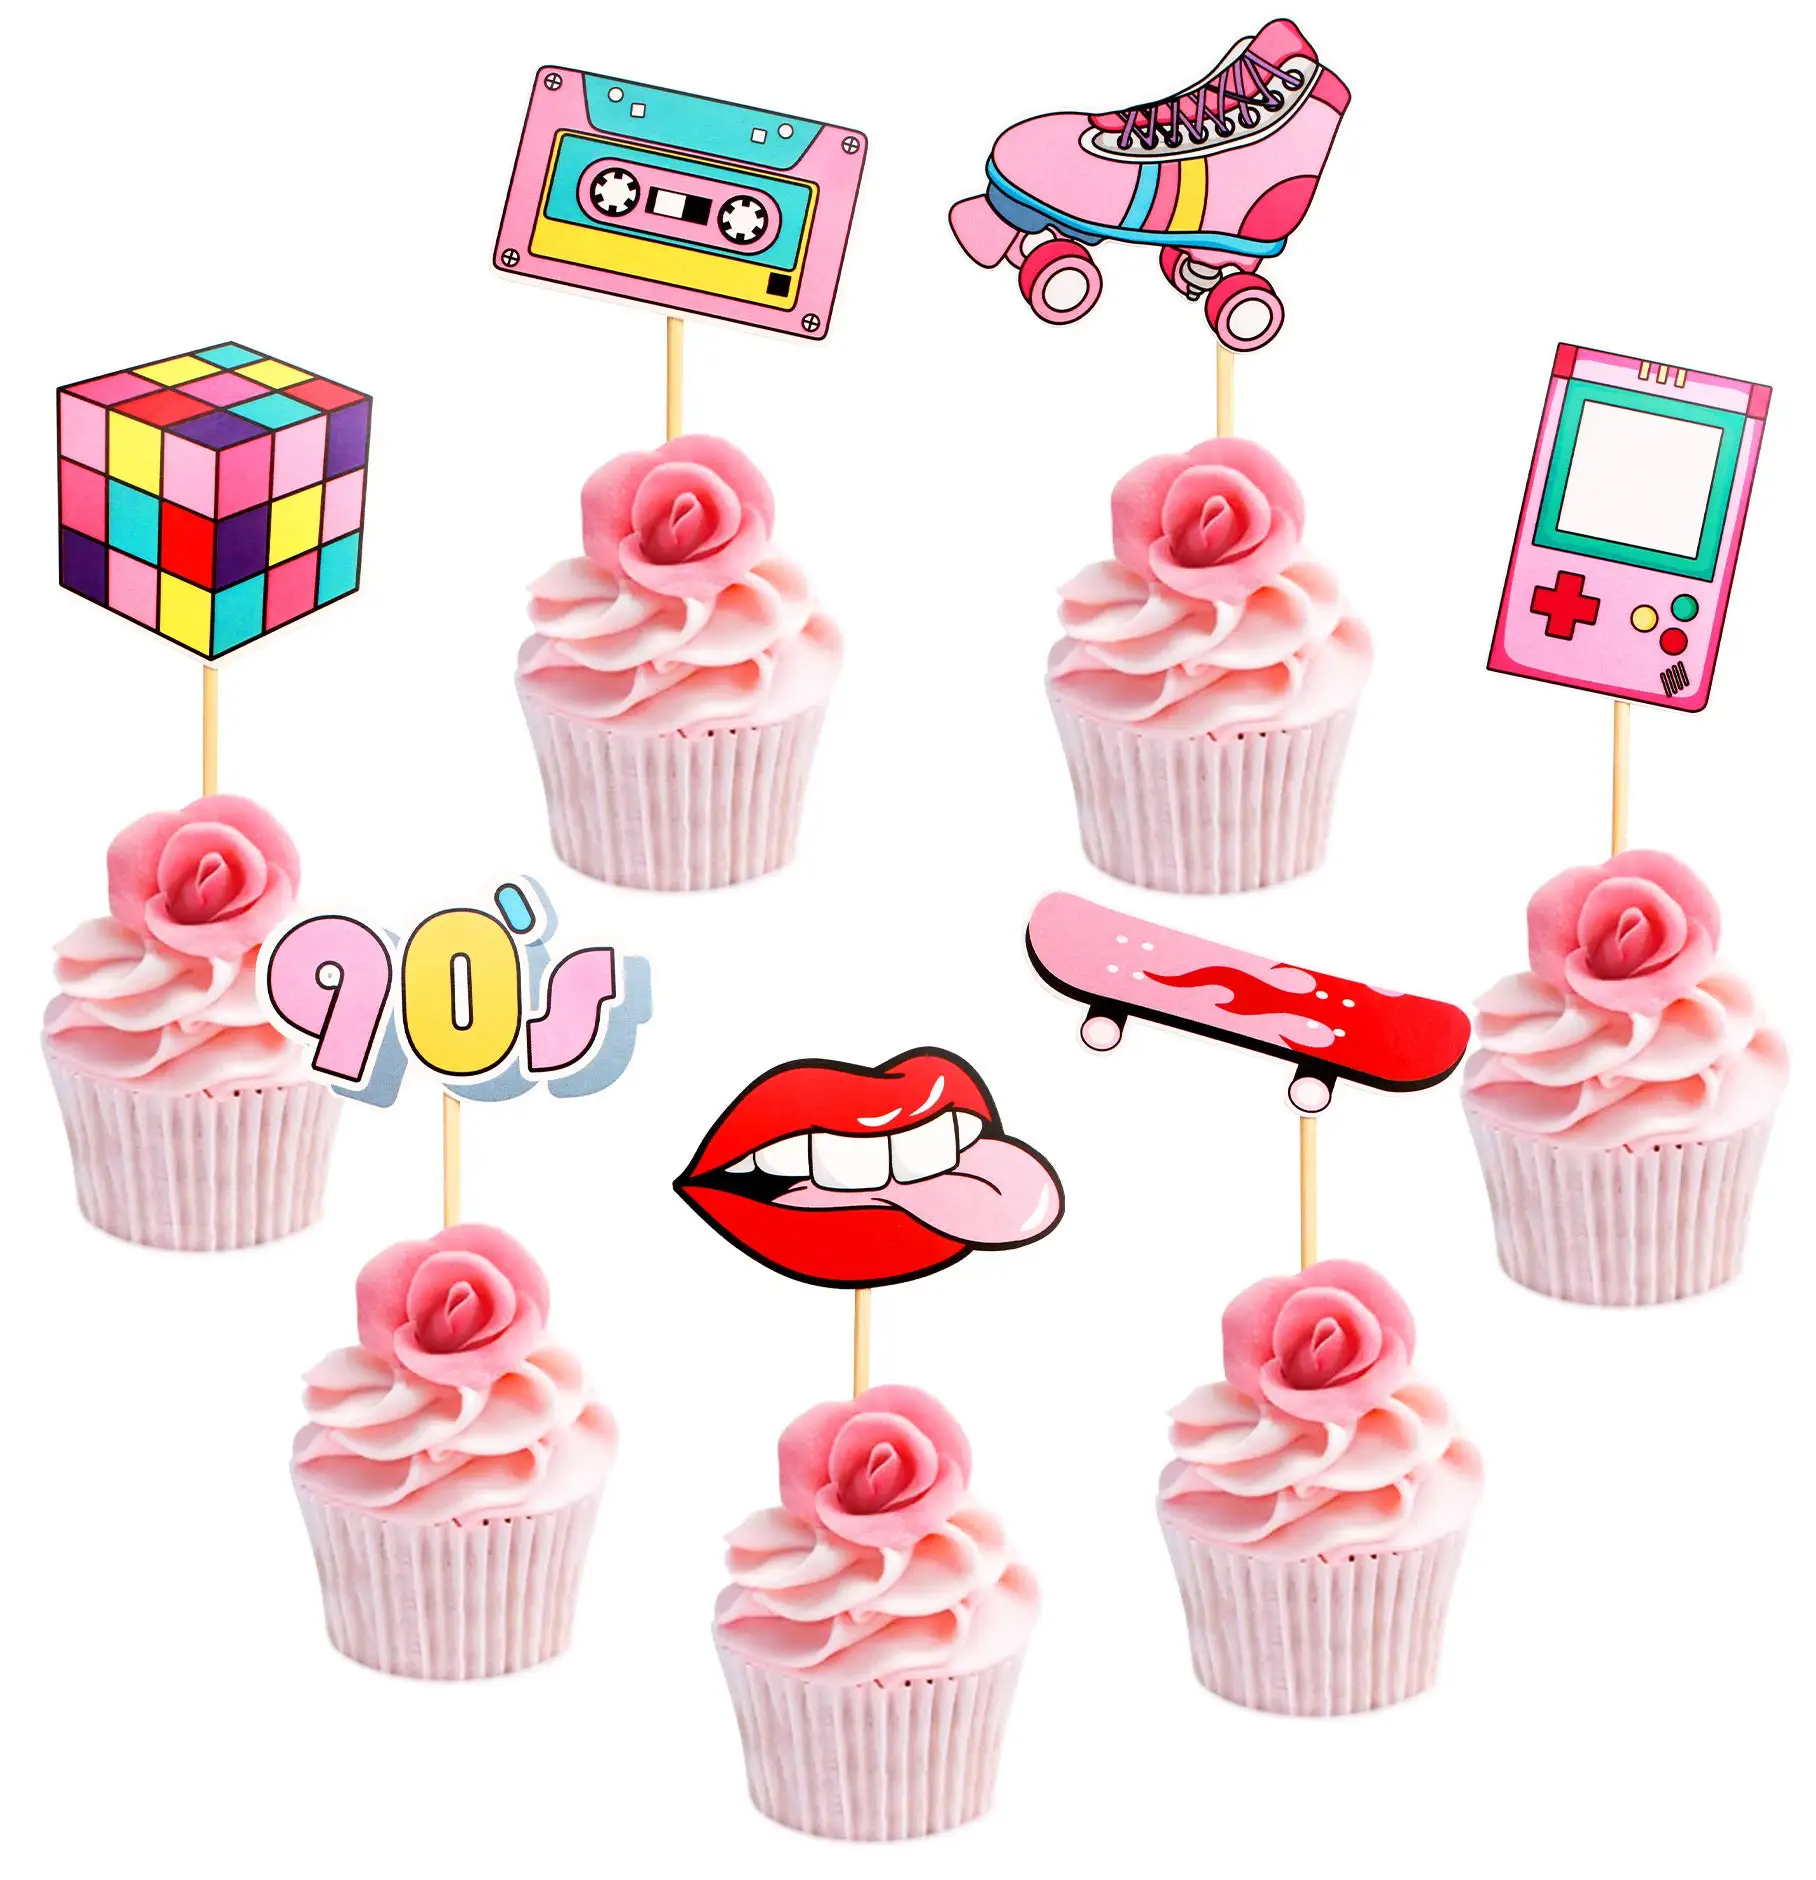 21Pcs 80s 90s Themed Cupcake Toppers Dessert Cupcake Toppers Birthday Supplies Throwback Party Favors Decorations 18 pcs little monster cupcake toppers monster bash cake toppers for baby shower birthday party monster themed party decorations